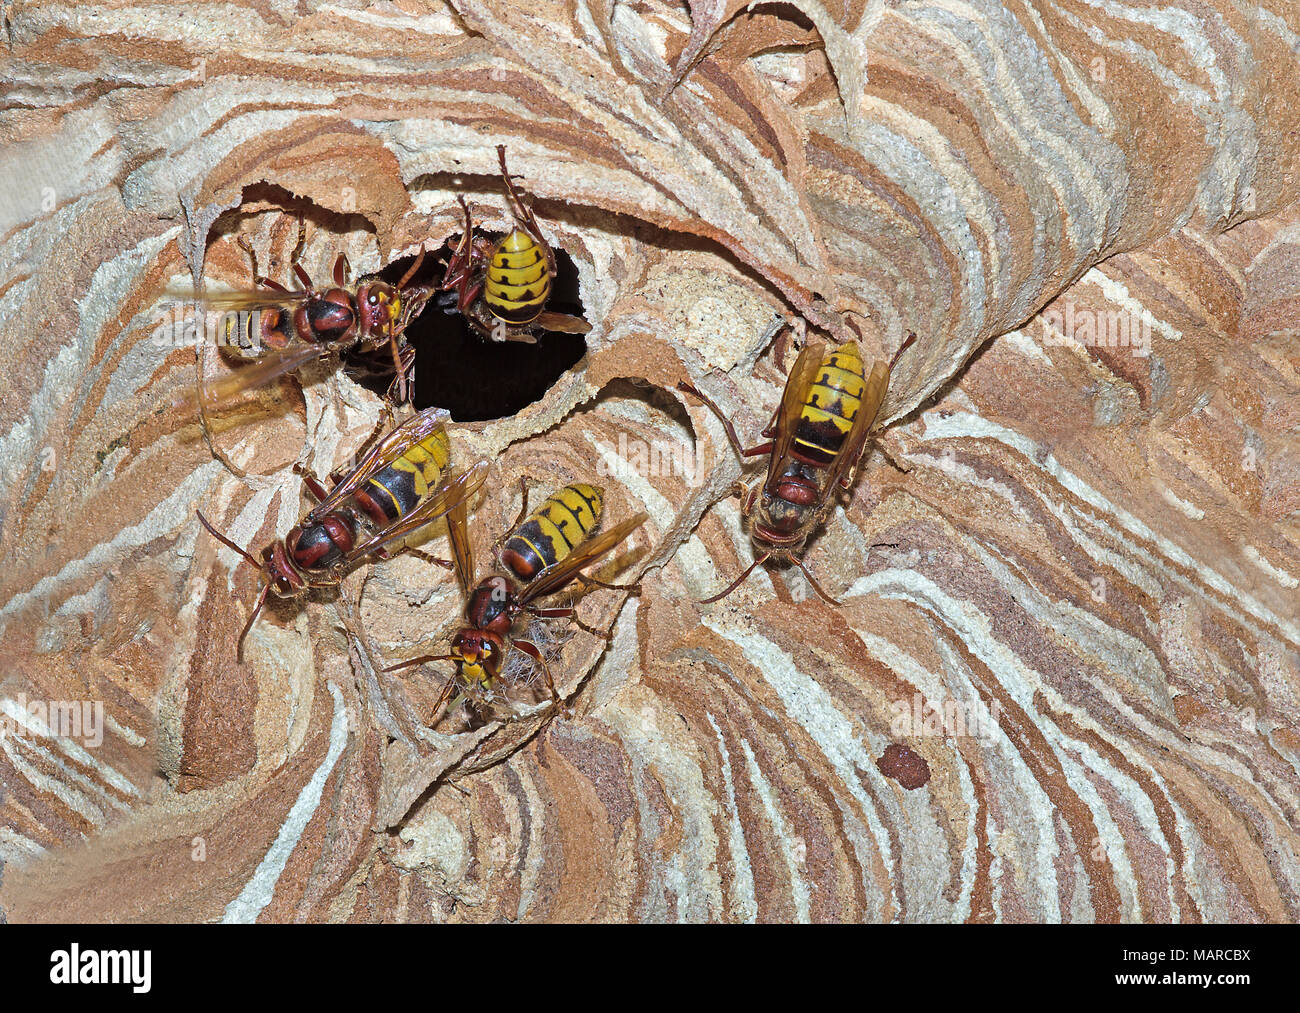 European Hornet, Brown Hornet (Vespa crabro). Several individuals at entrance to nest. Germany Stock Photo